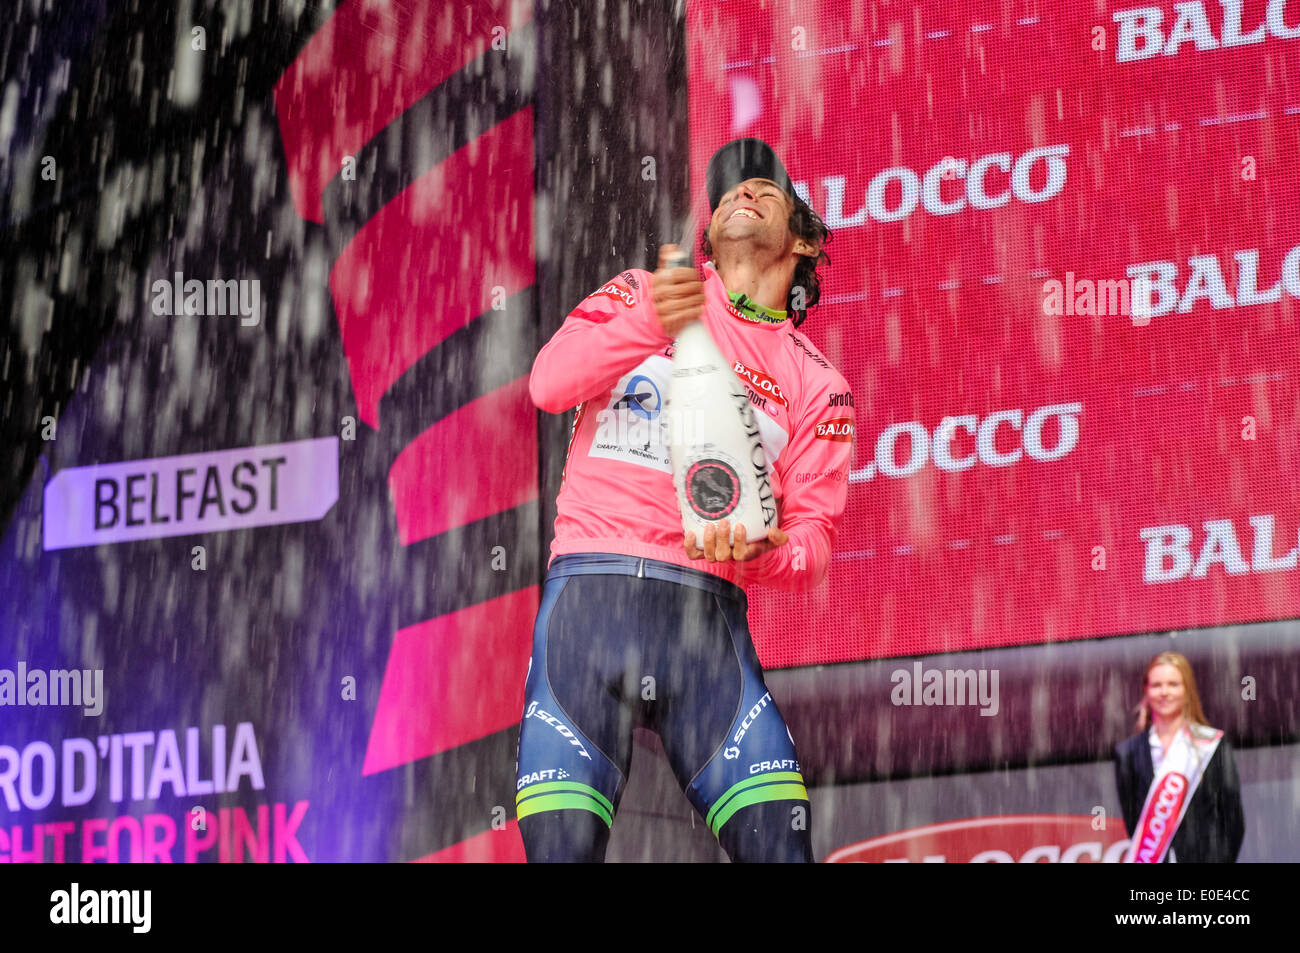 Belfast, Northern Ireland. 10 May 2014 - Australia’s Michael Matthews takes over the pink Maglia Rosa of the overall race leader in the Giro d'Italia, worn during the stage by his team-mate Svein Tuft. Credit:  Stephen Barnes/Alamy Live News Stock Photo